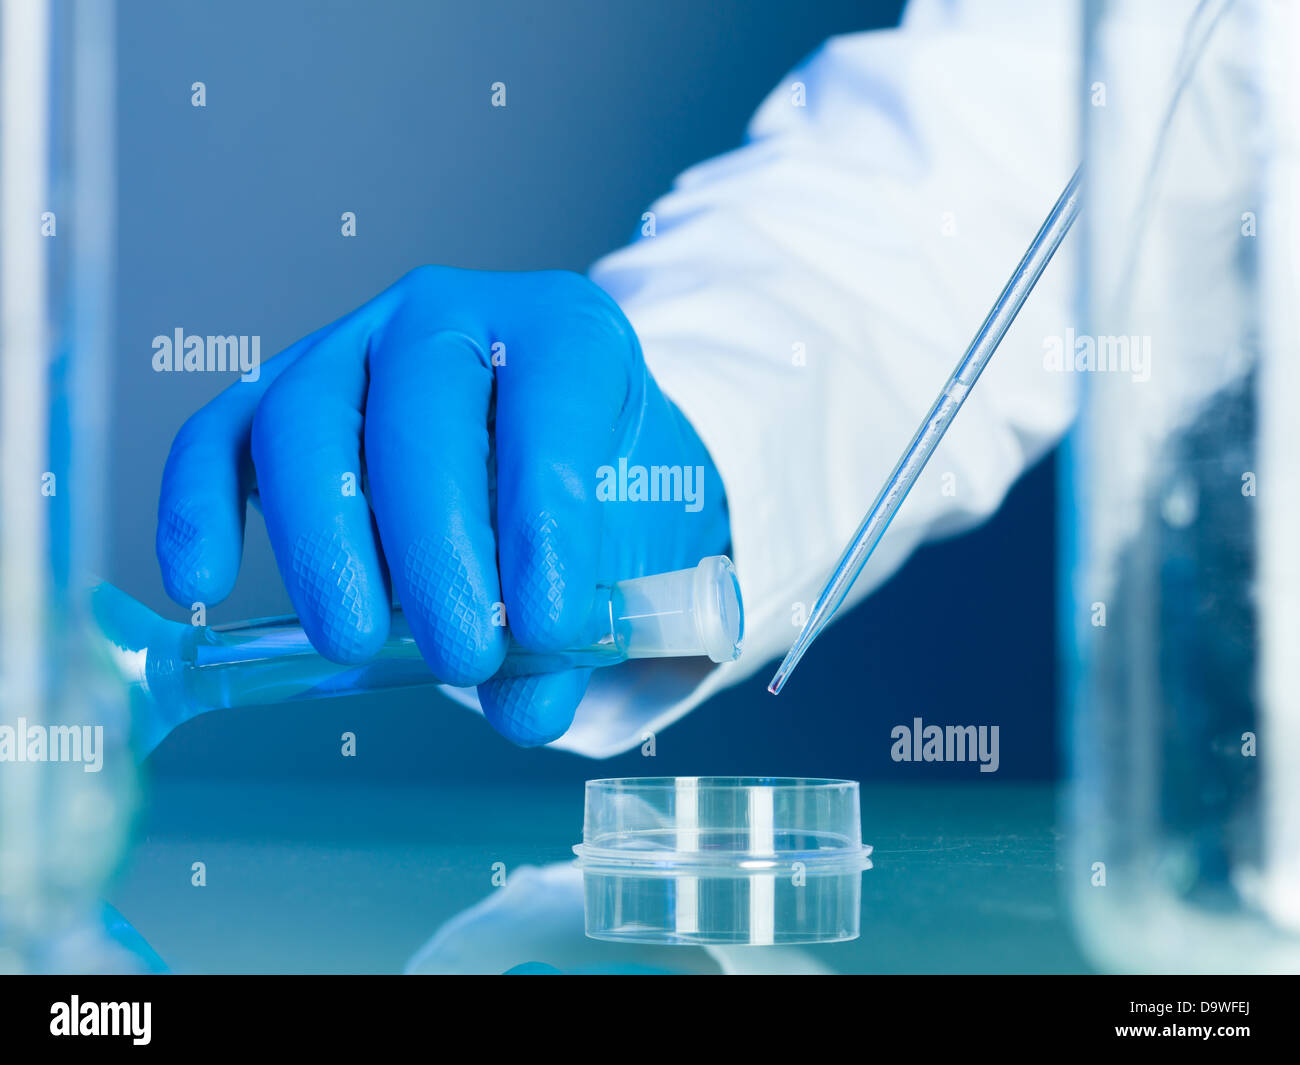 person wearing a white lab coat and blue rubber gloves pouring a blue substance in a petri dish and mixing it with drops of transparent liquid from a pipette on a reflective surface Stock Photo